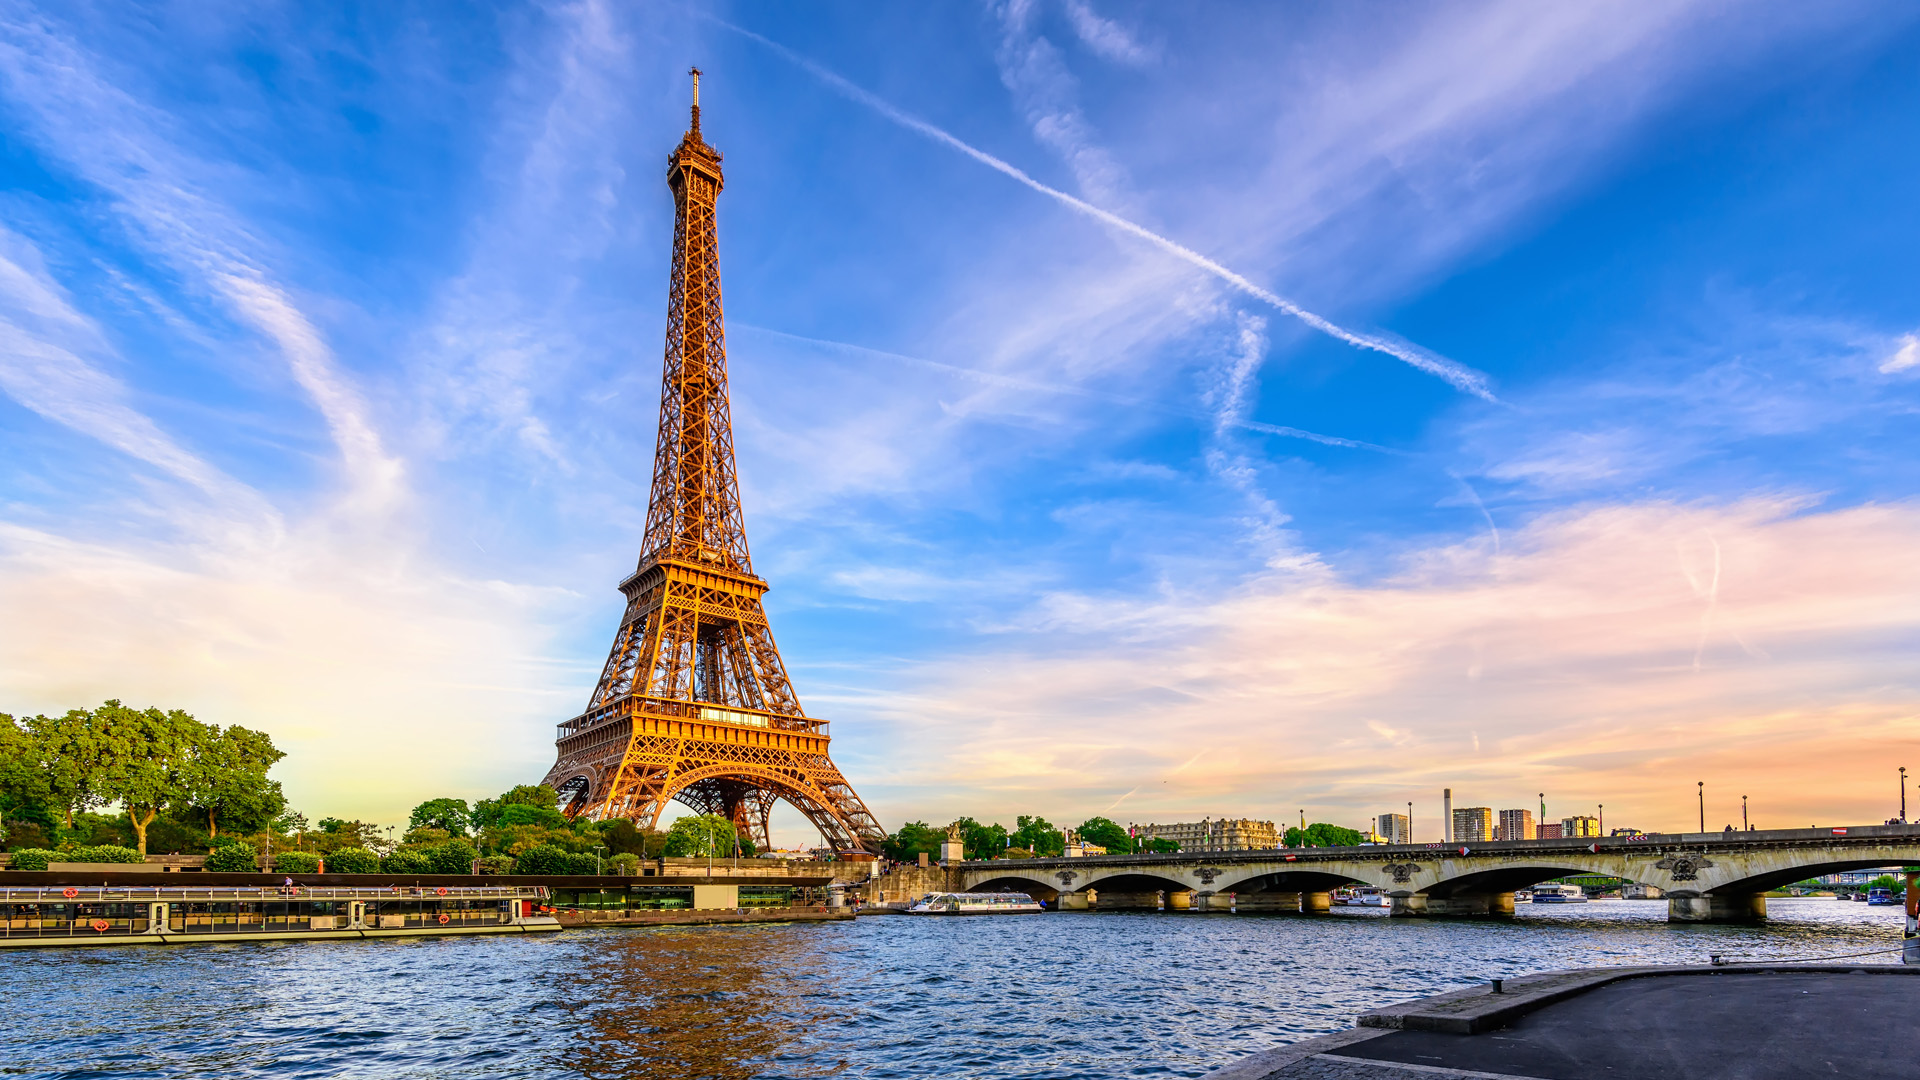 Eiffel Tower and river Seine at sunset in Paris, France | Windows ...